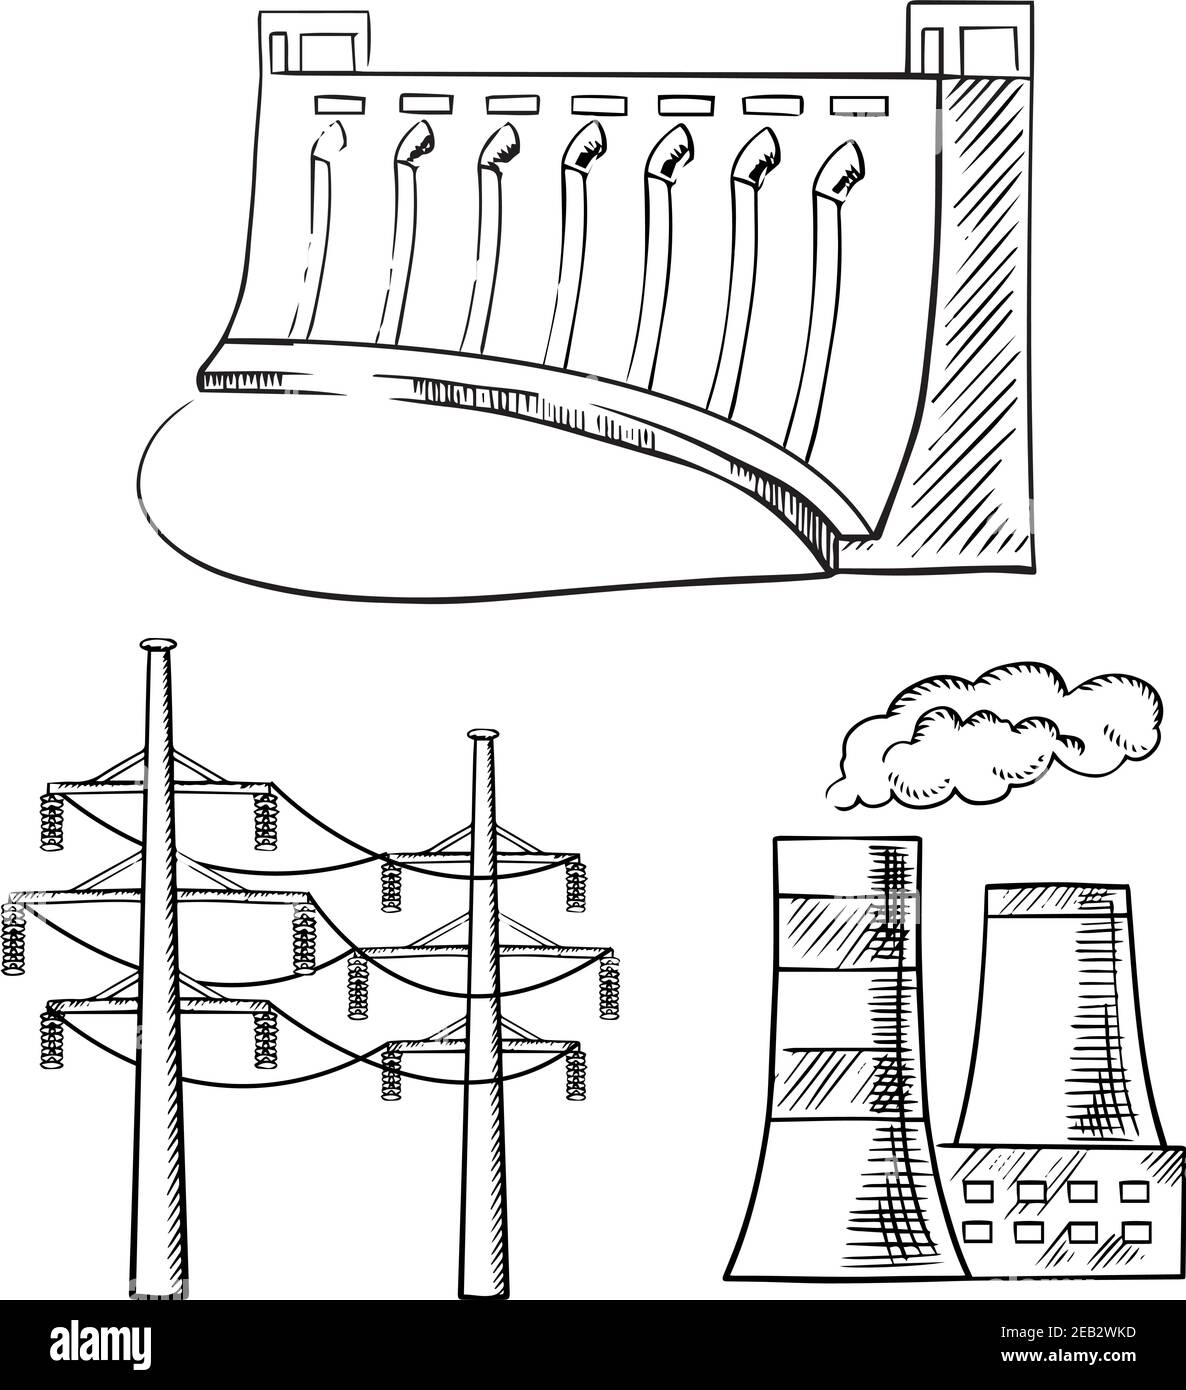 Hydro power plant with dam, thermal power plant with cooling towers and high voltage power line towers. Sketch icons for industry theme design Stock Vector